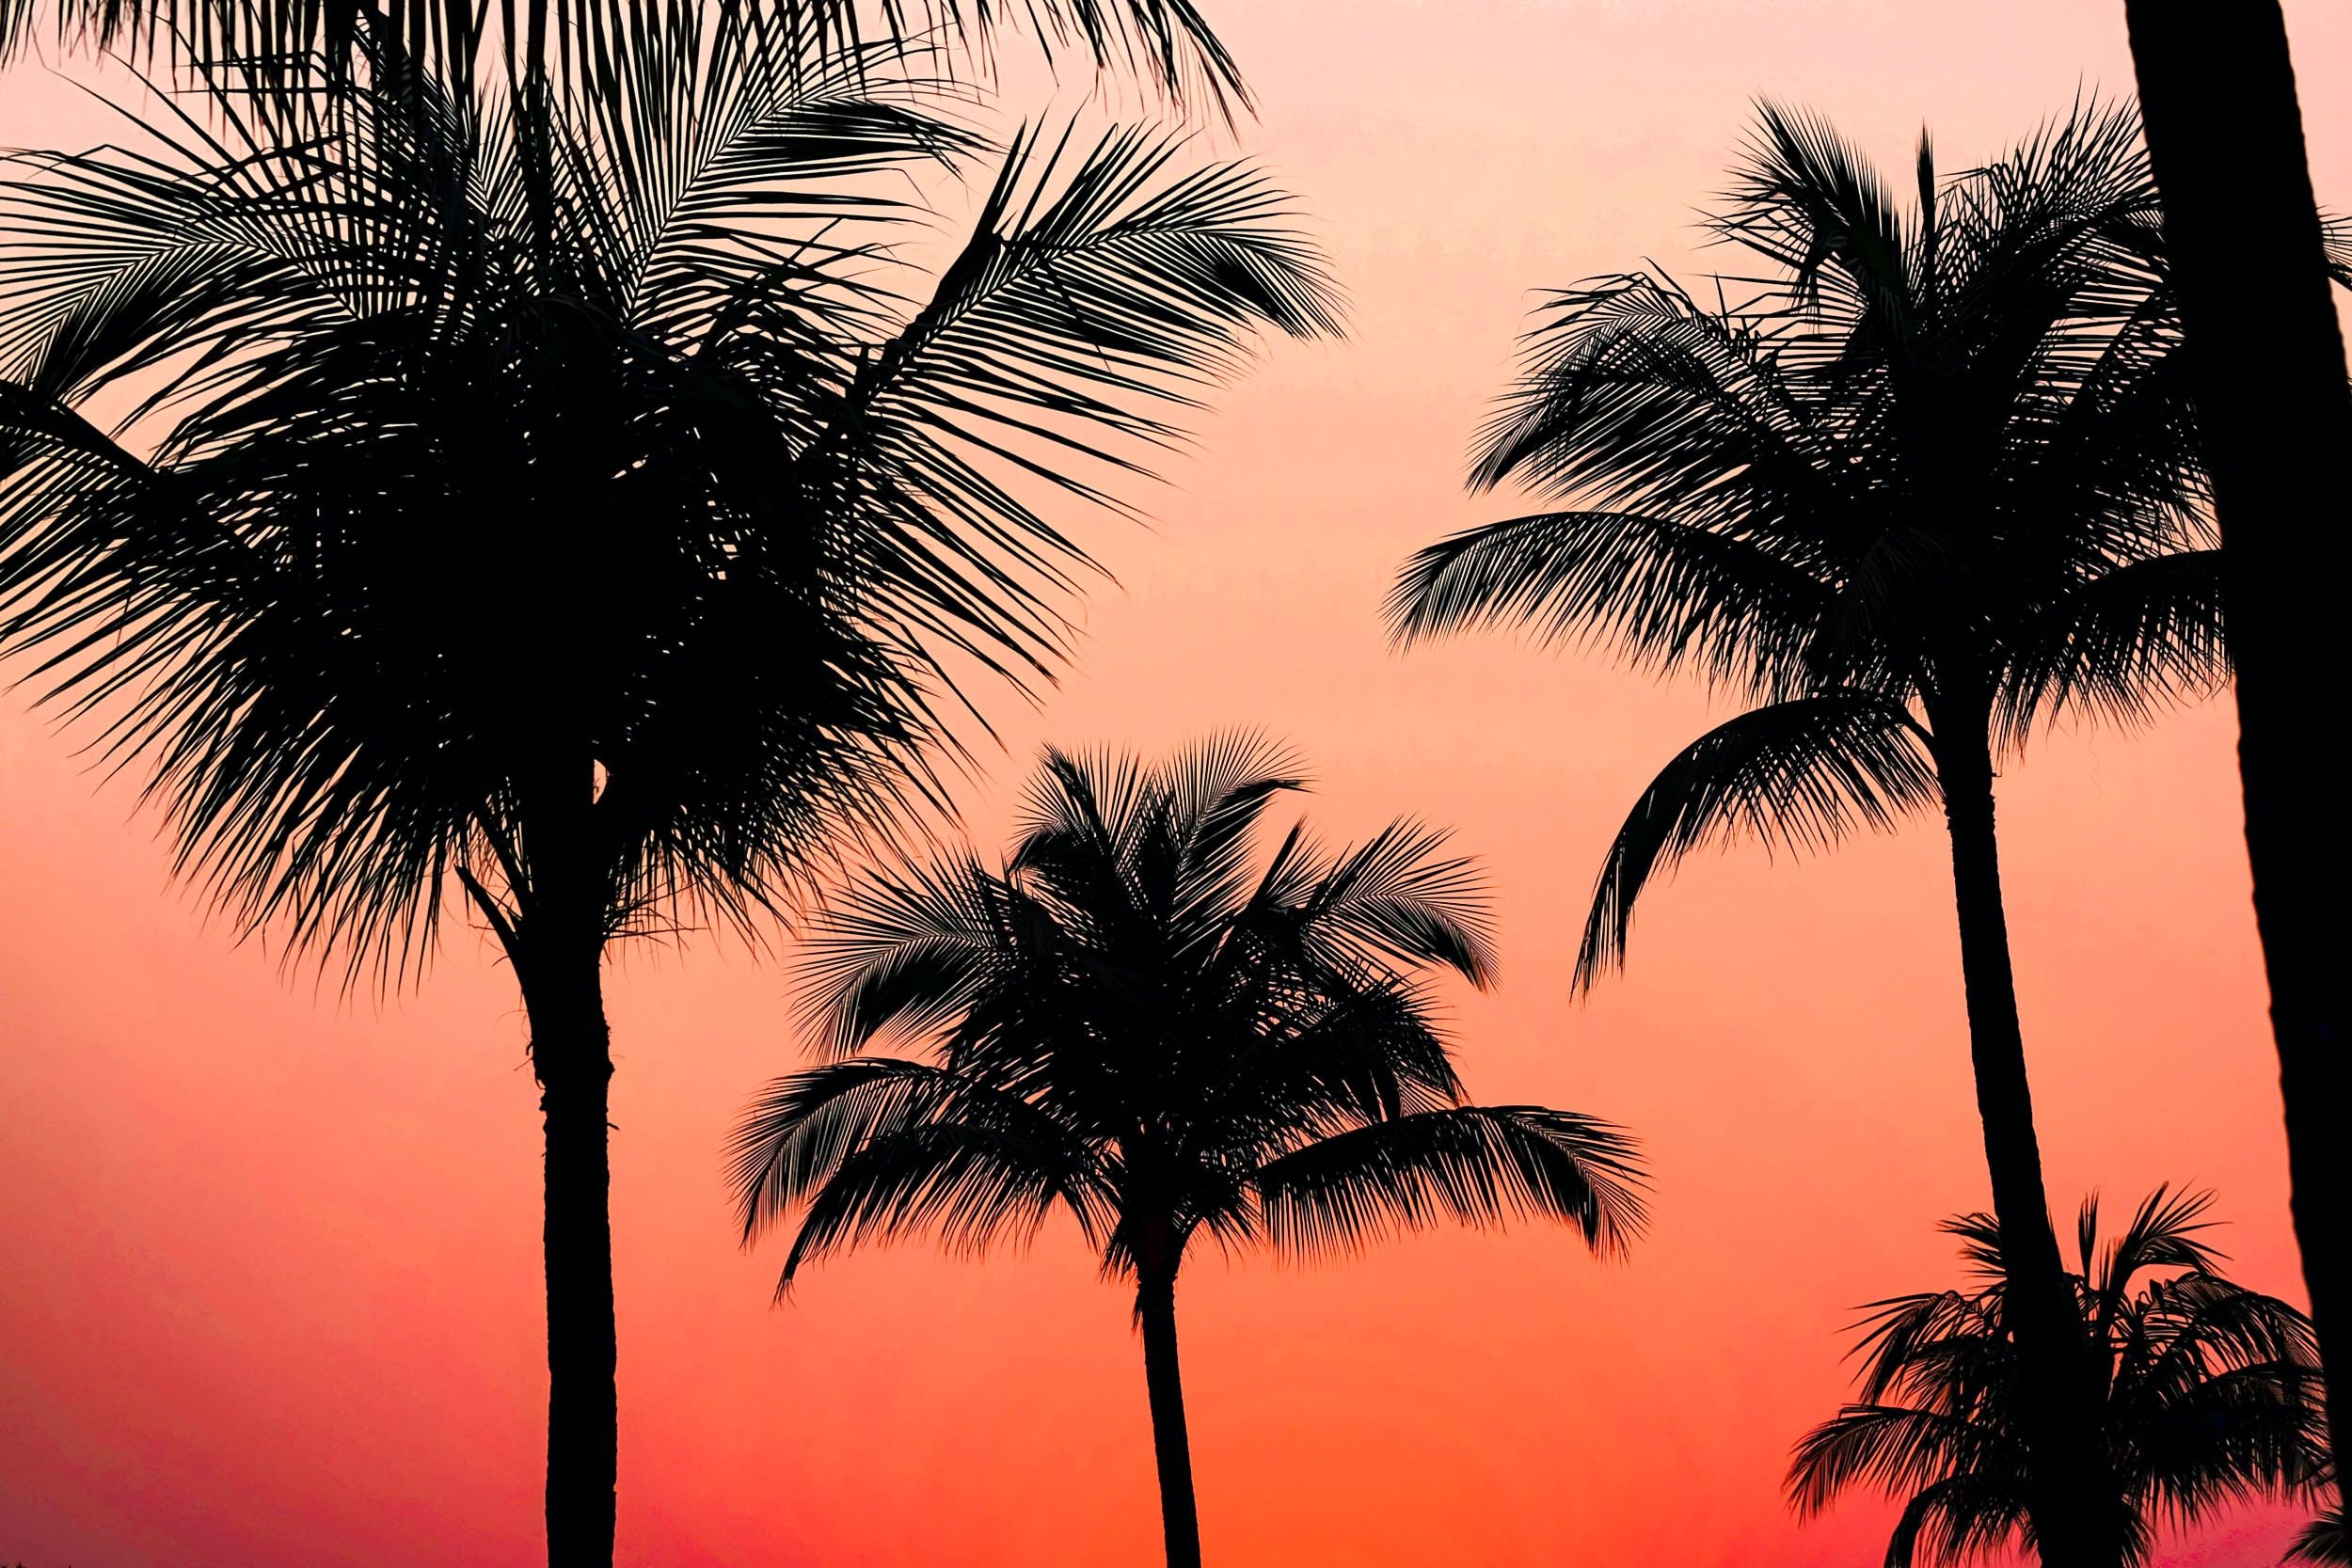 Silhouette of palm trees against a red sky - Tropical